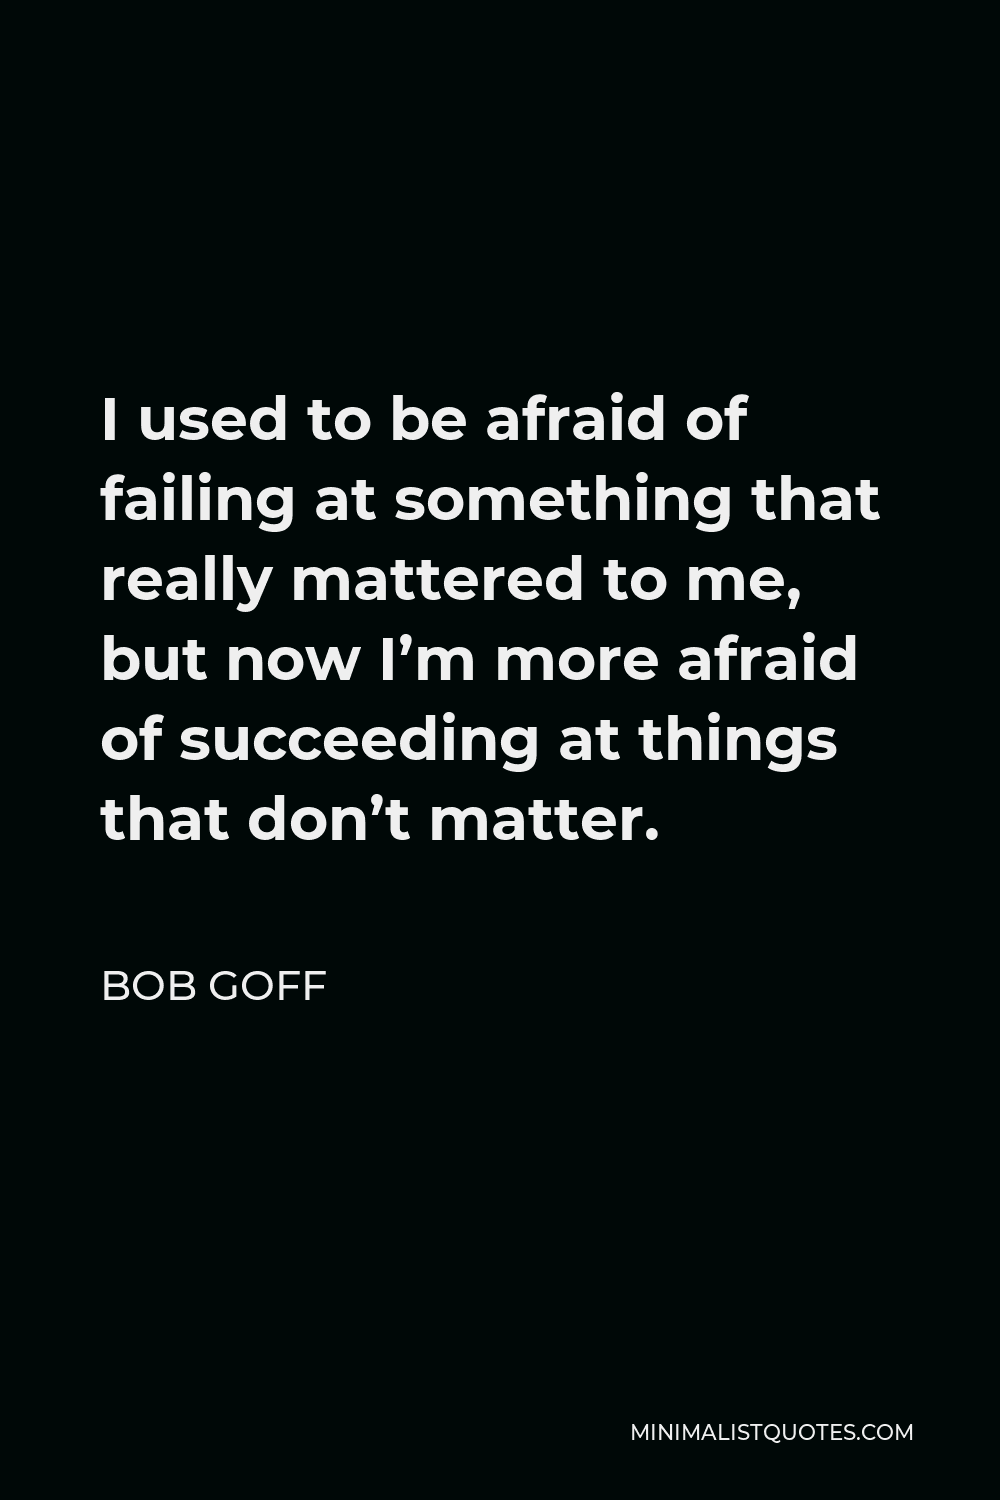 Bob Goff Quote - I used to be afraid of failing at something that really mattered to me, but now I’m more afraid of succeeding at things that don’t matter.